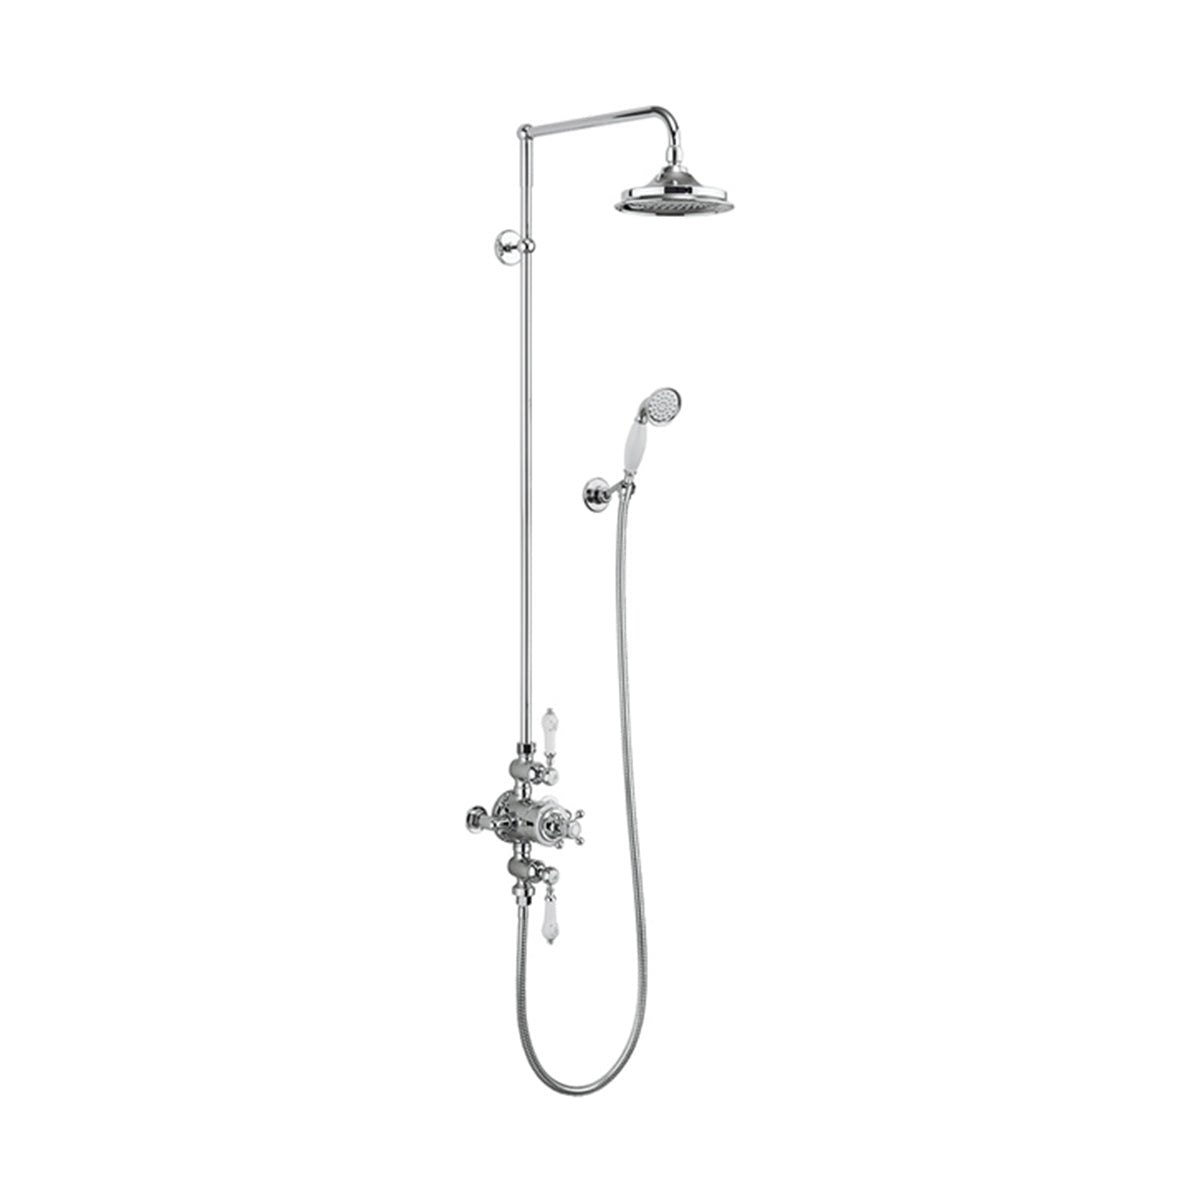 Burlington Avon Thermostatic Dual Outlet Valve With Rigid Riser and Shower Set With Overhead Deluxe Bathrooms UK